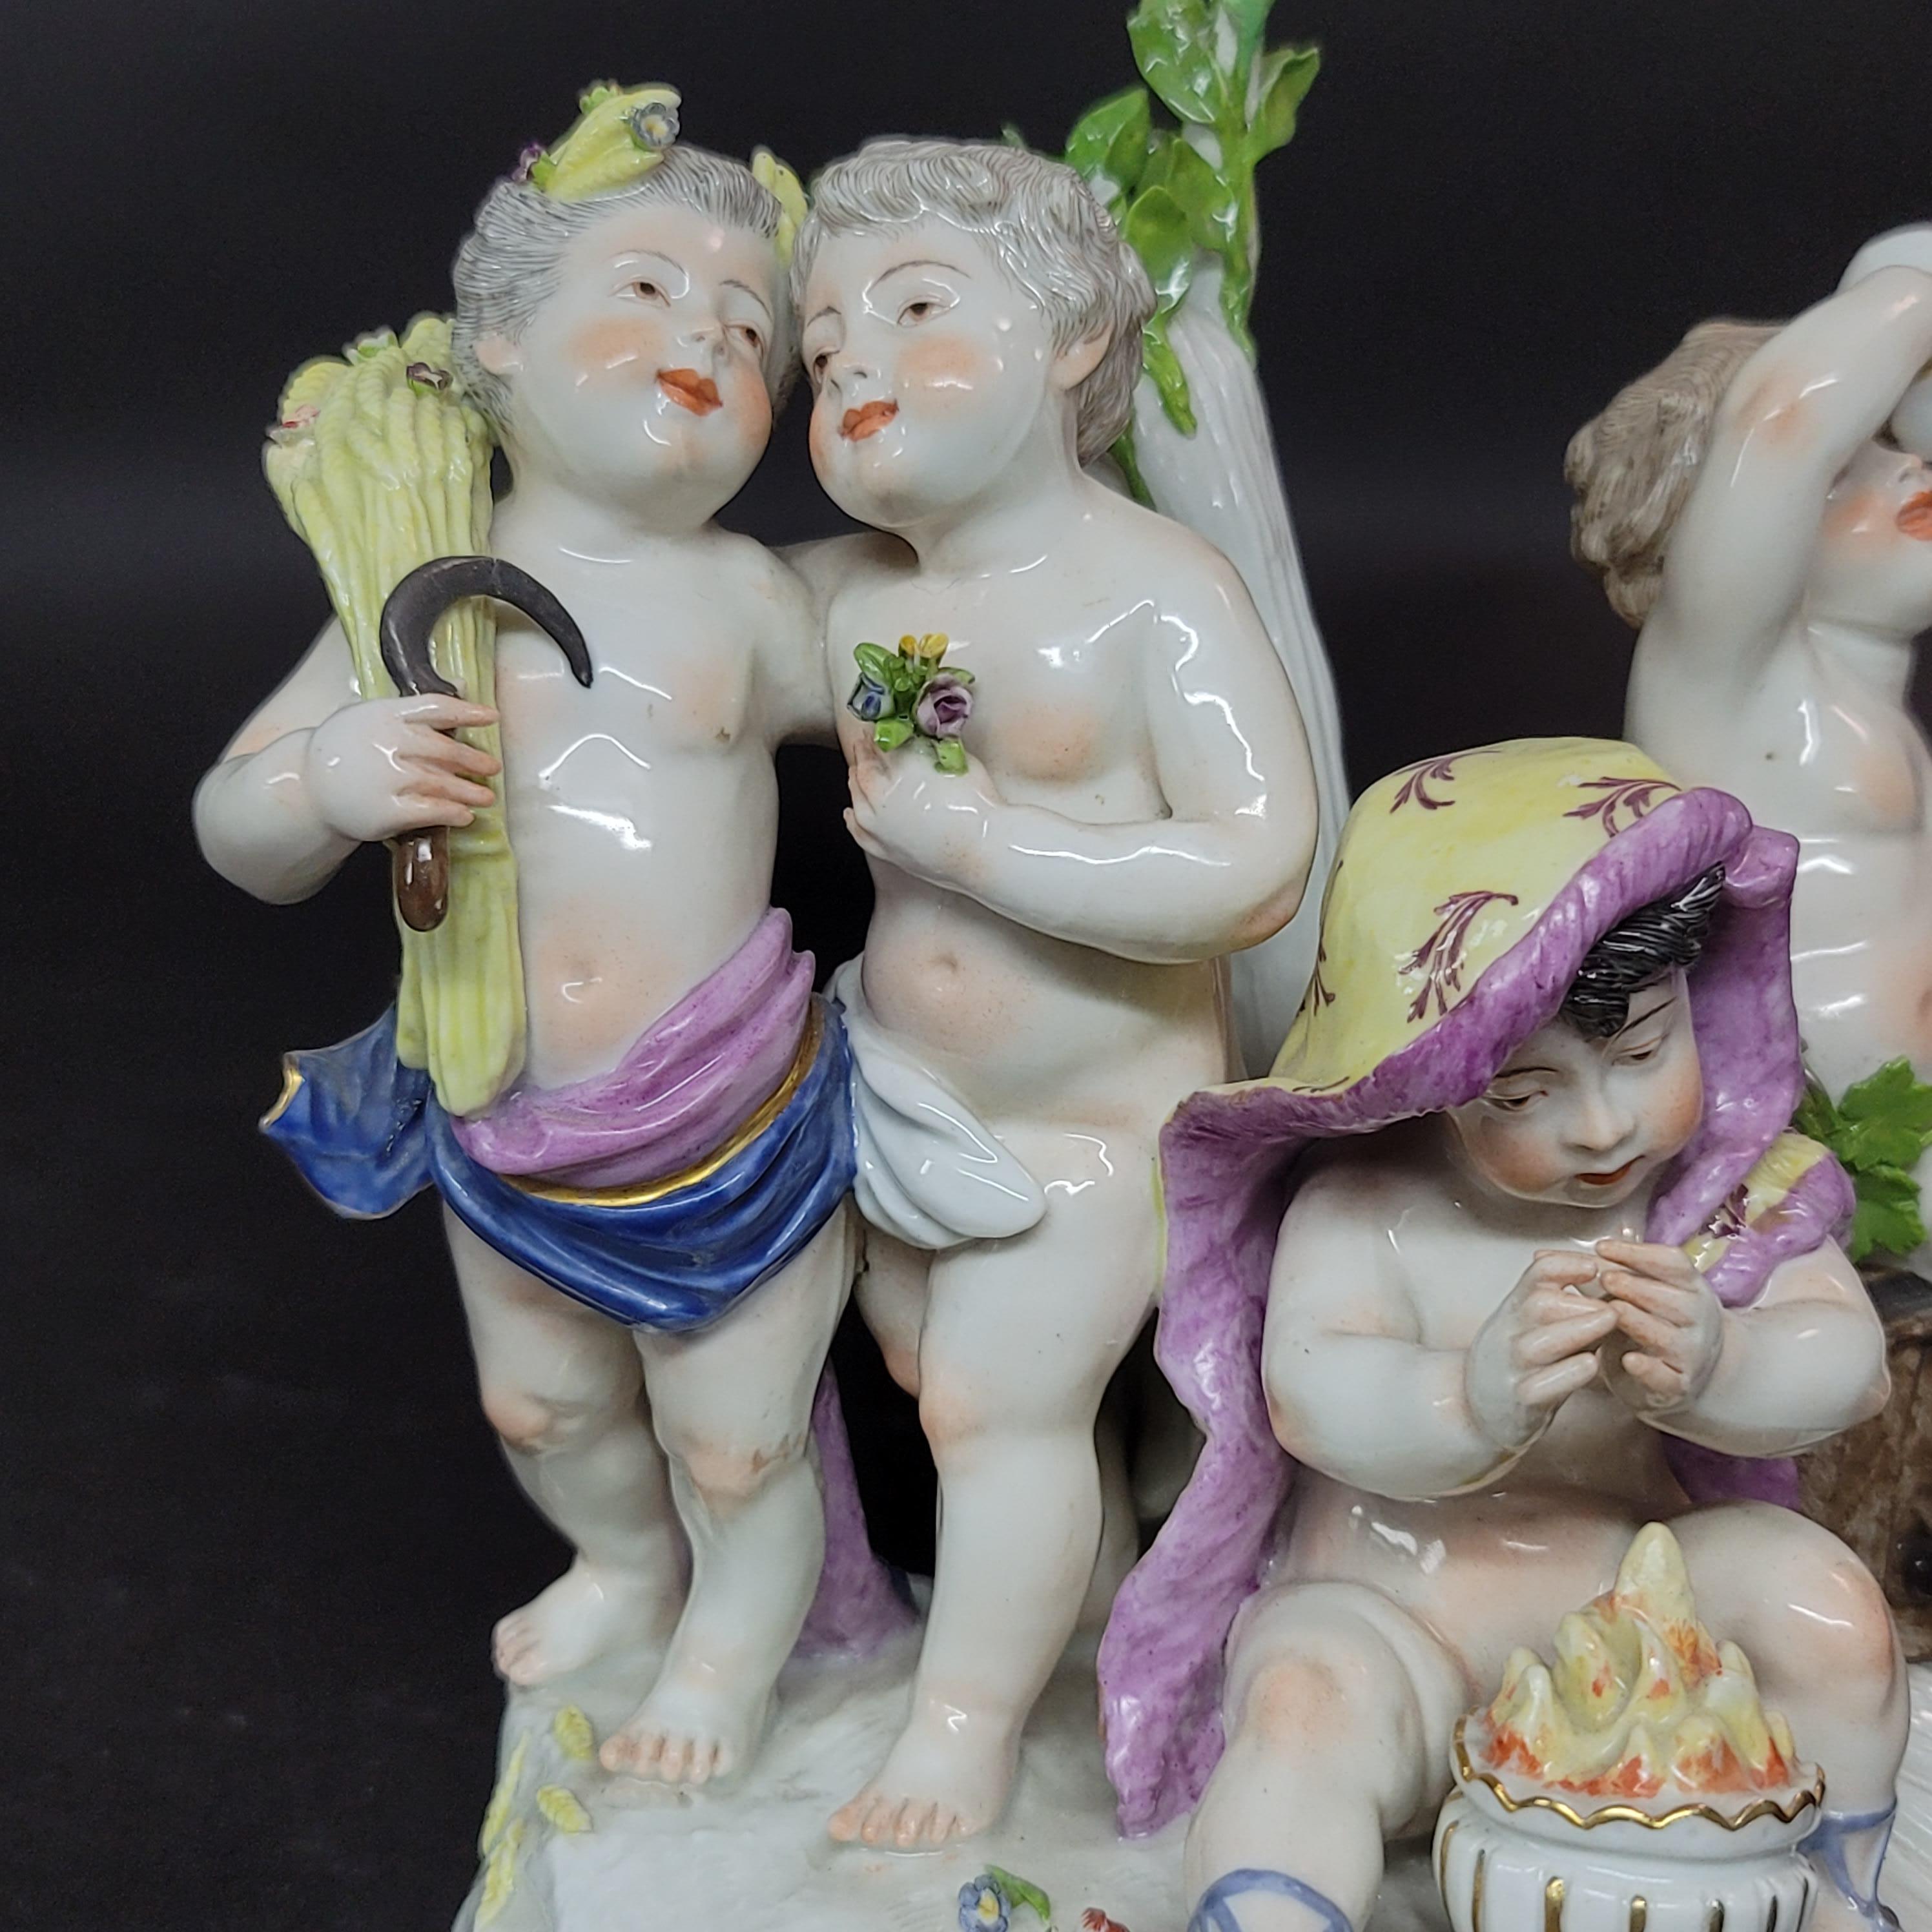 A 19th cent porcelain group by Ludwigsburg depicts a group of frolicking putti angels, completed with hand-painted accents and a glossy glaze. Stamped along the underside with Ludwigsburg mark.
  